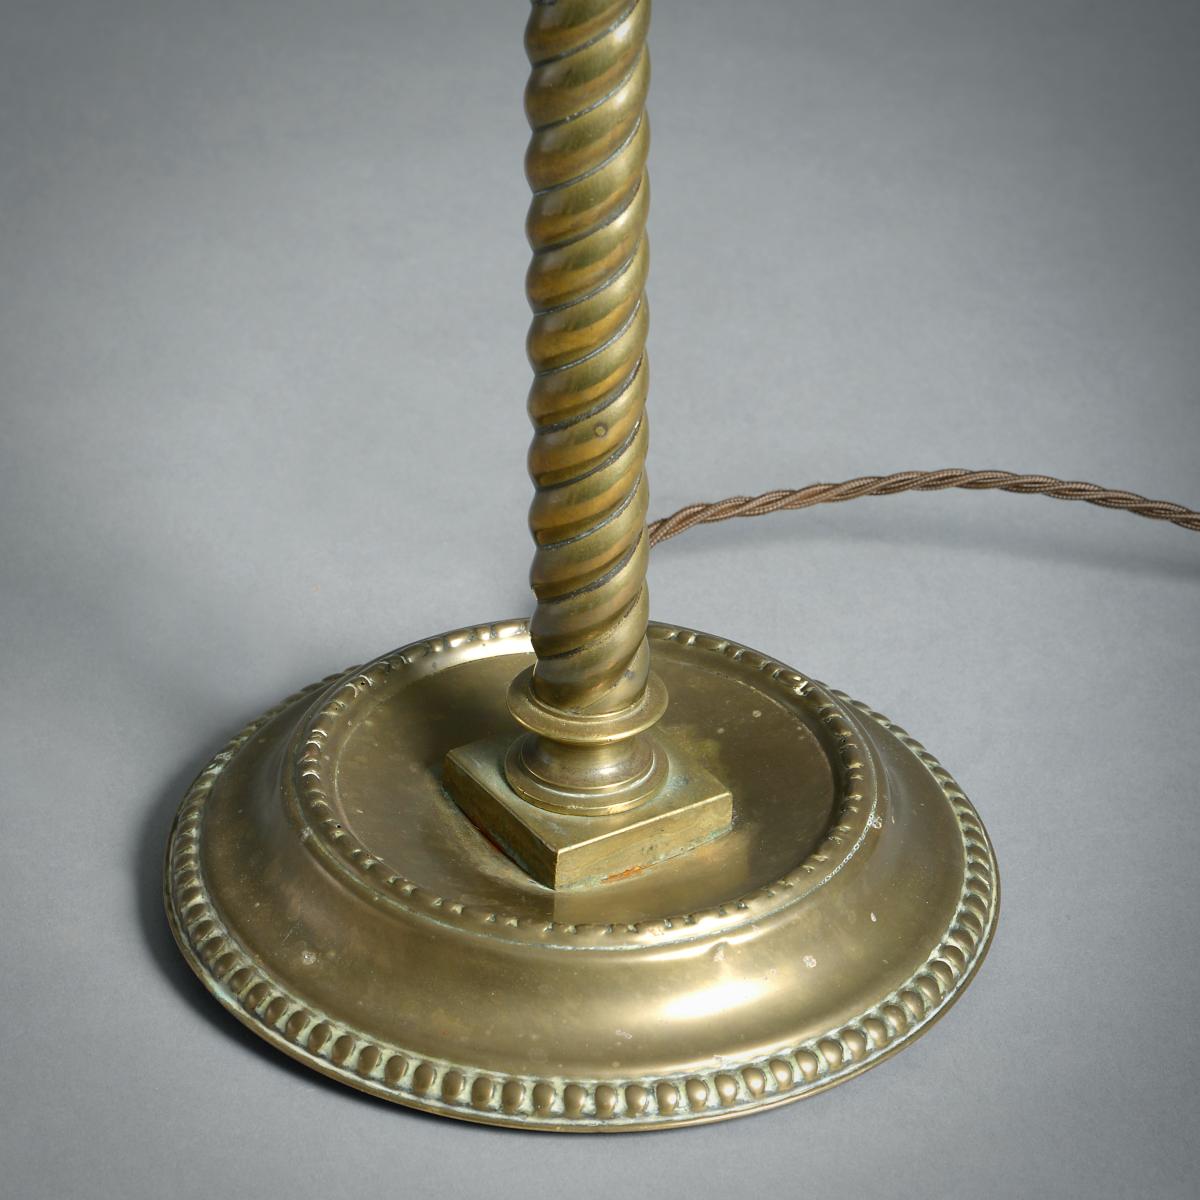 Pair of Late Victorian Brass Spiral Column Table Lamps